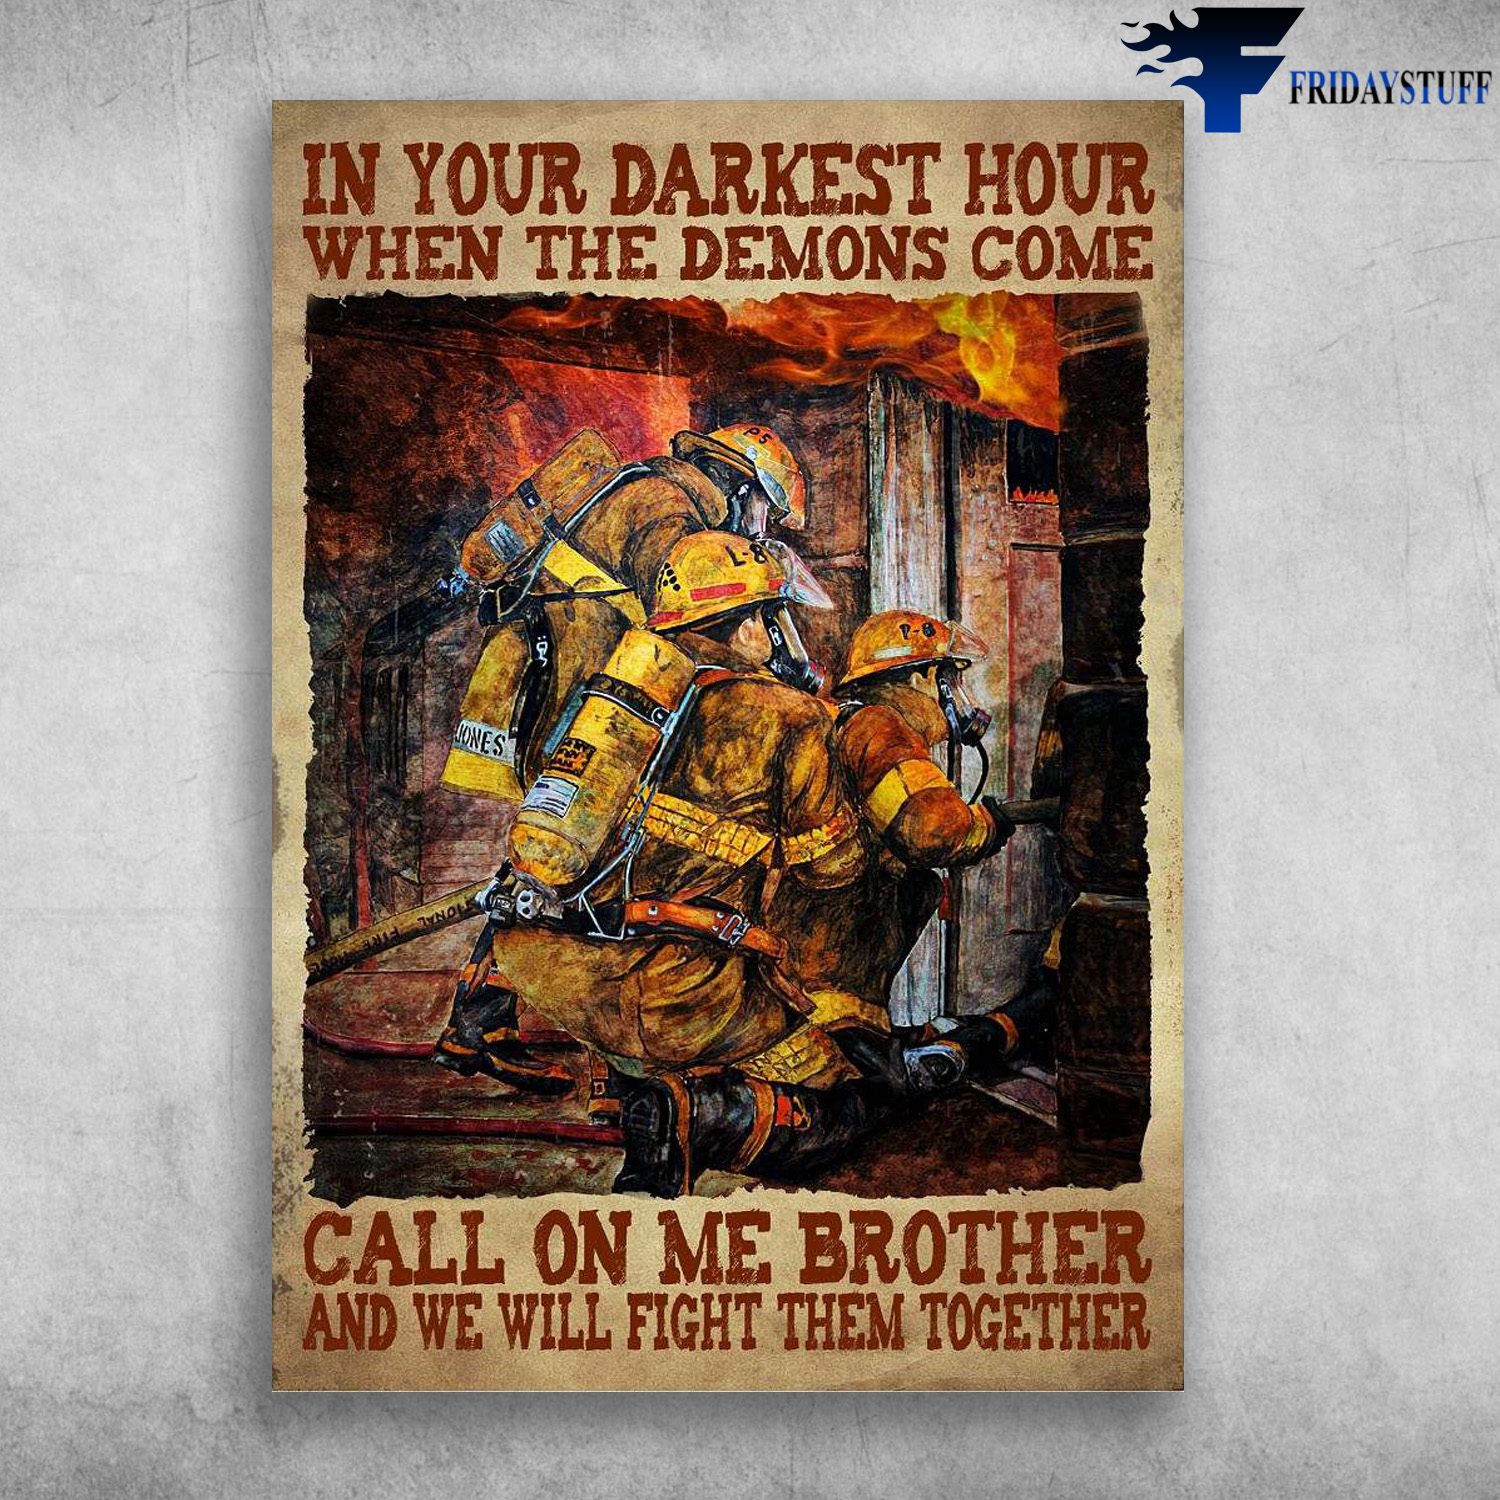 Firefighter Man - In Your Darkest Hour, When The Demons Come, Call On Me Brother, And We Will Fight Them Together